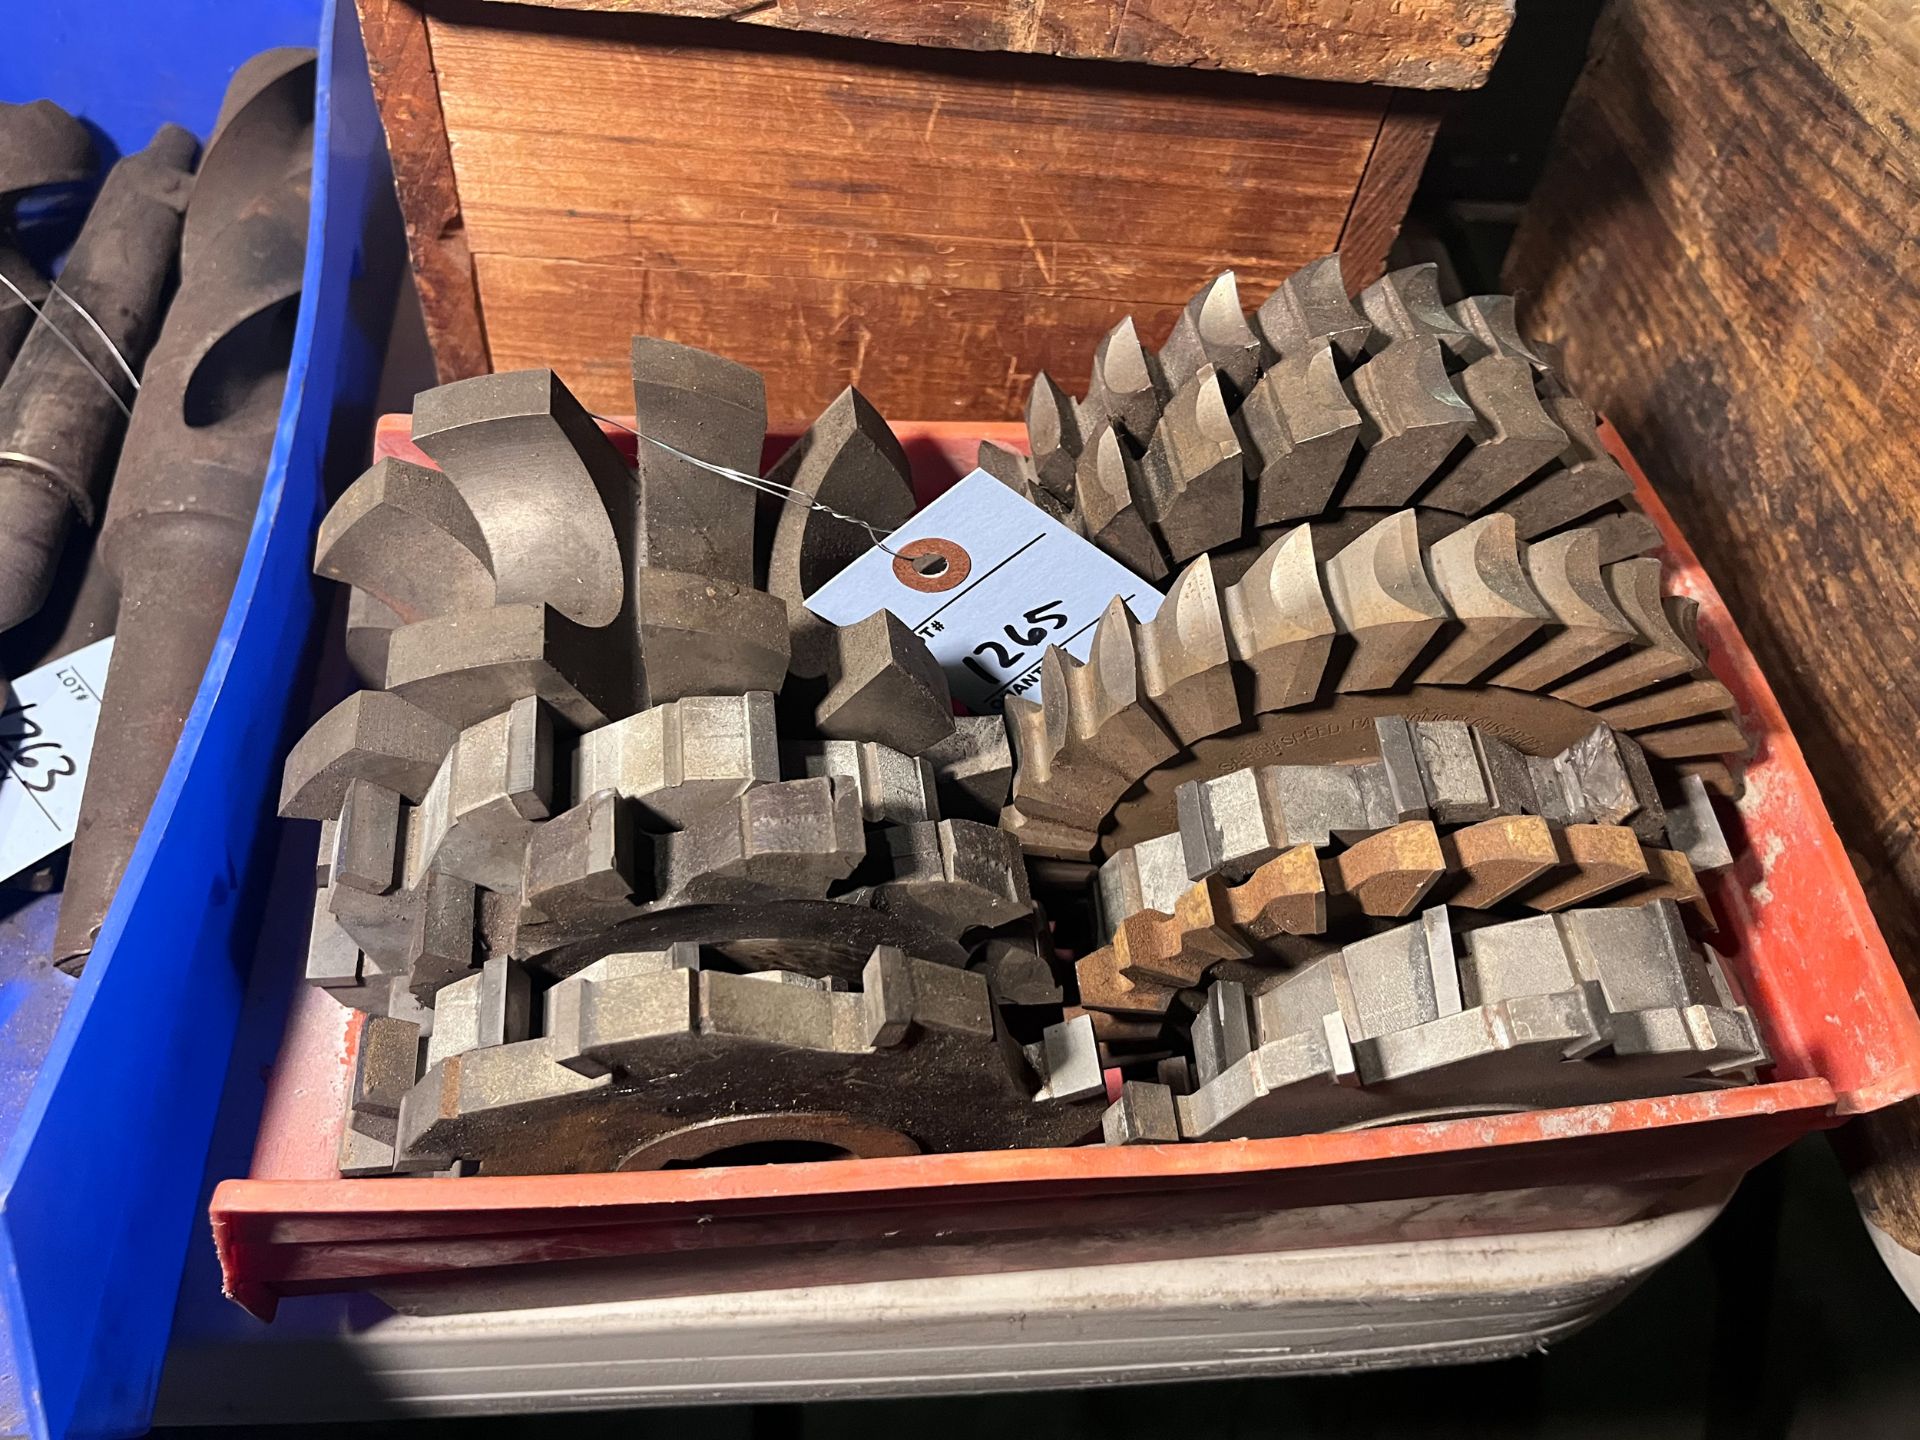 (12) Assorted Milling Cutters